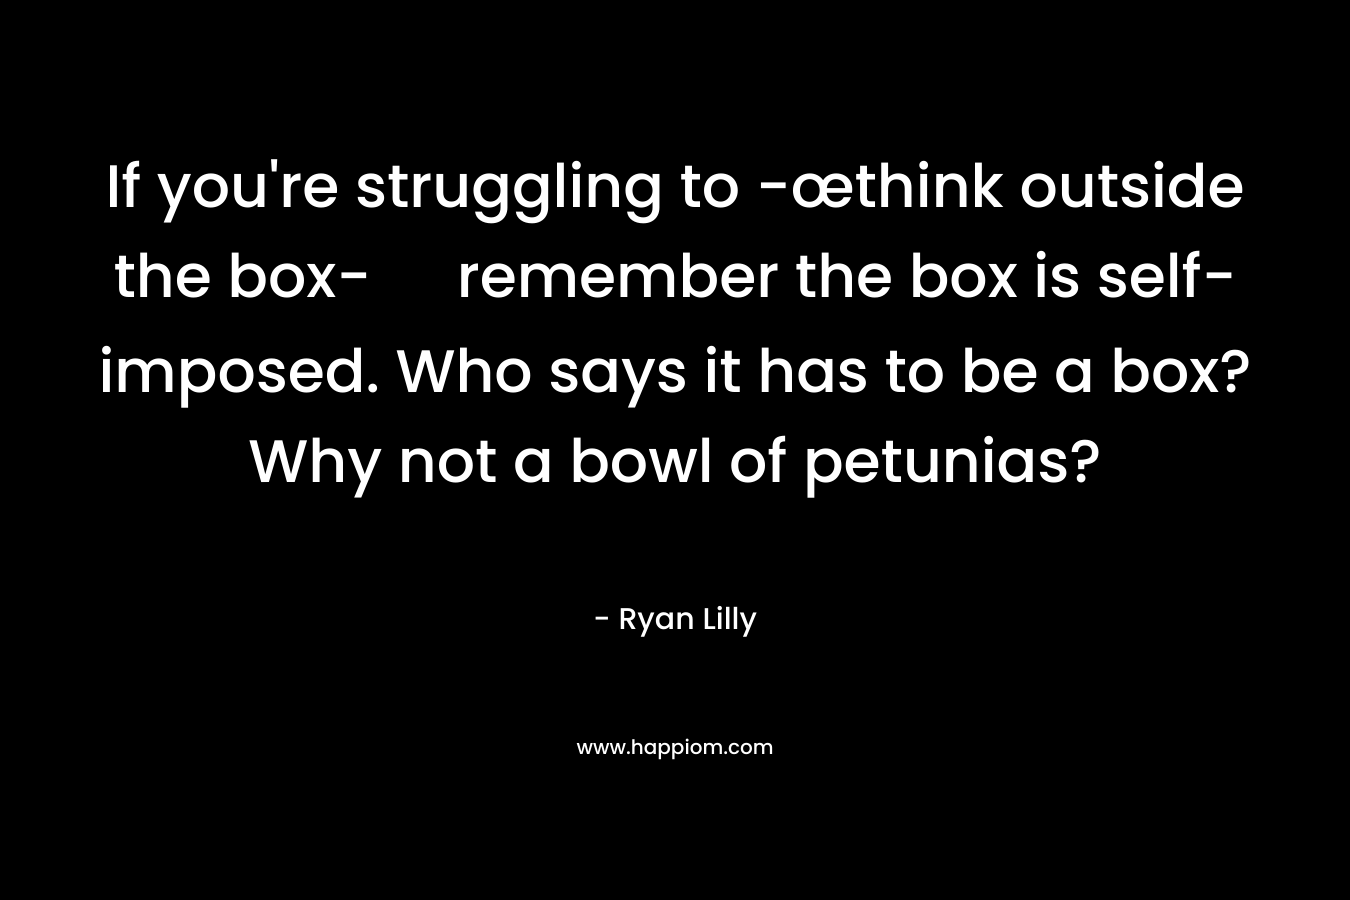 If you’re struggling to -œthink outside the box- remember the box is self-imposed. Who says it has to be a box? Why not a bowl of petunias? – Ryan Lilly